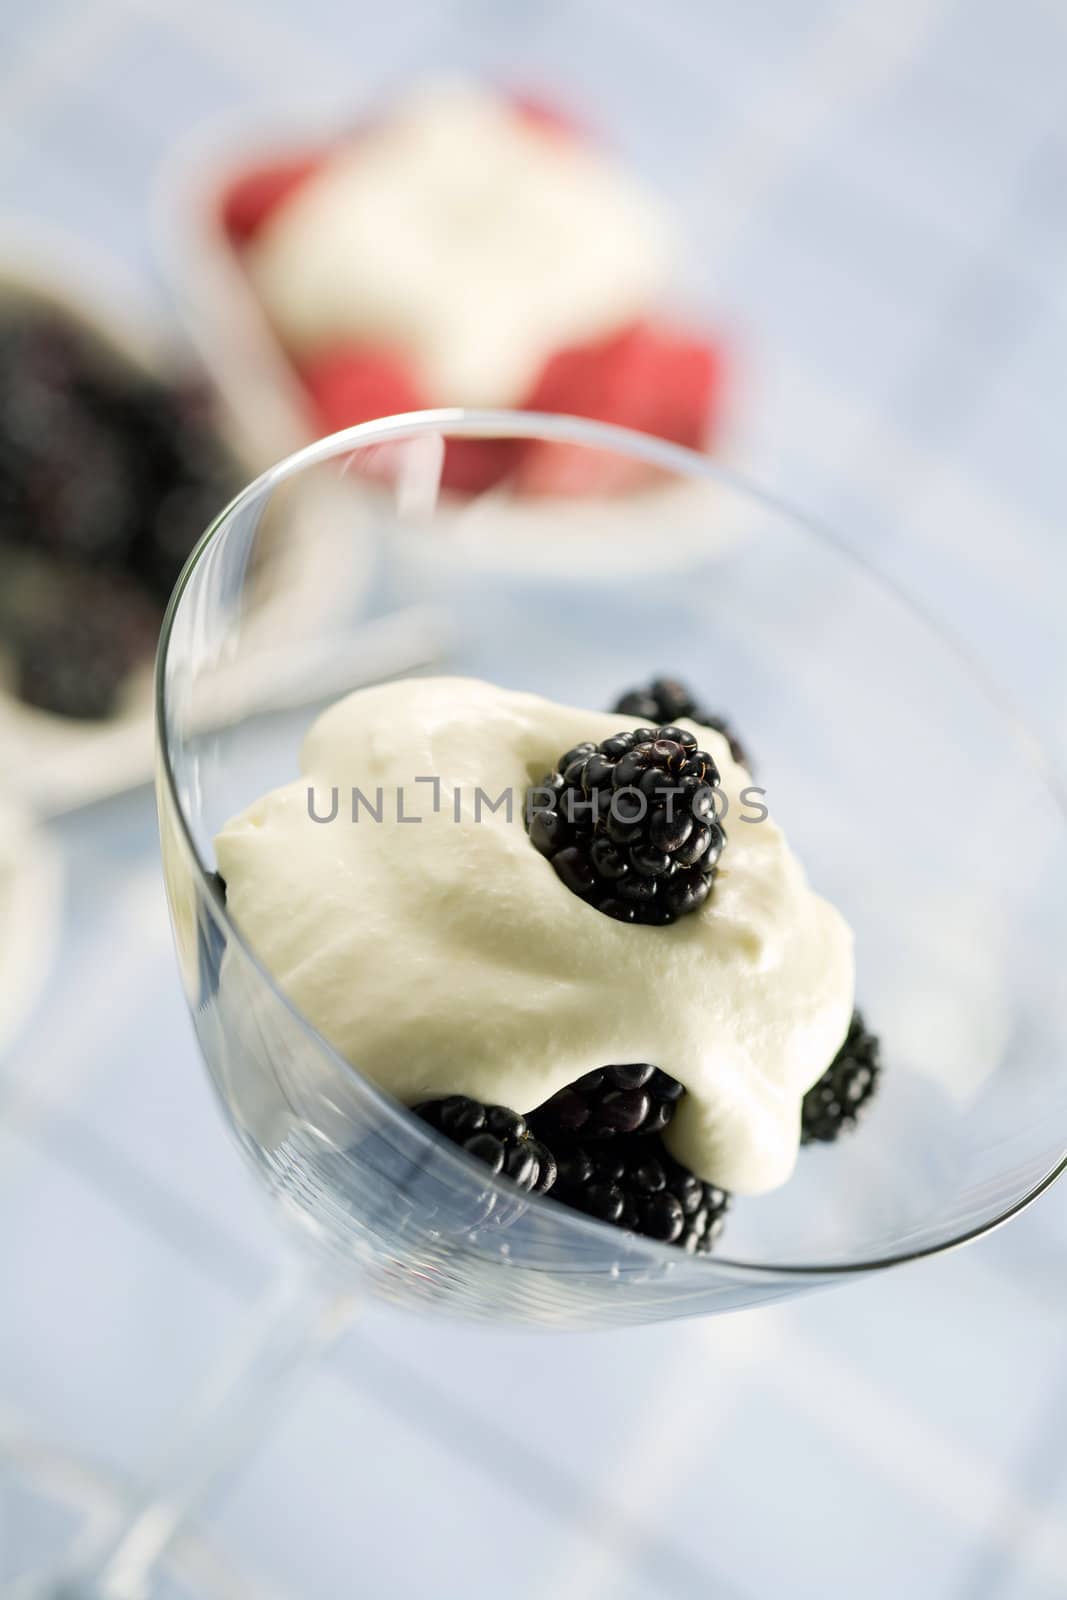 Dessert with blackberries and whipped cream served in a martini glass